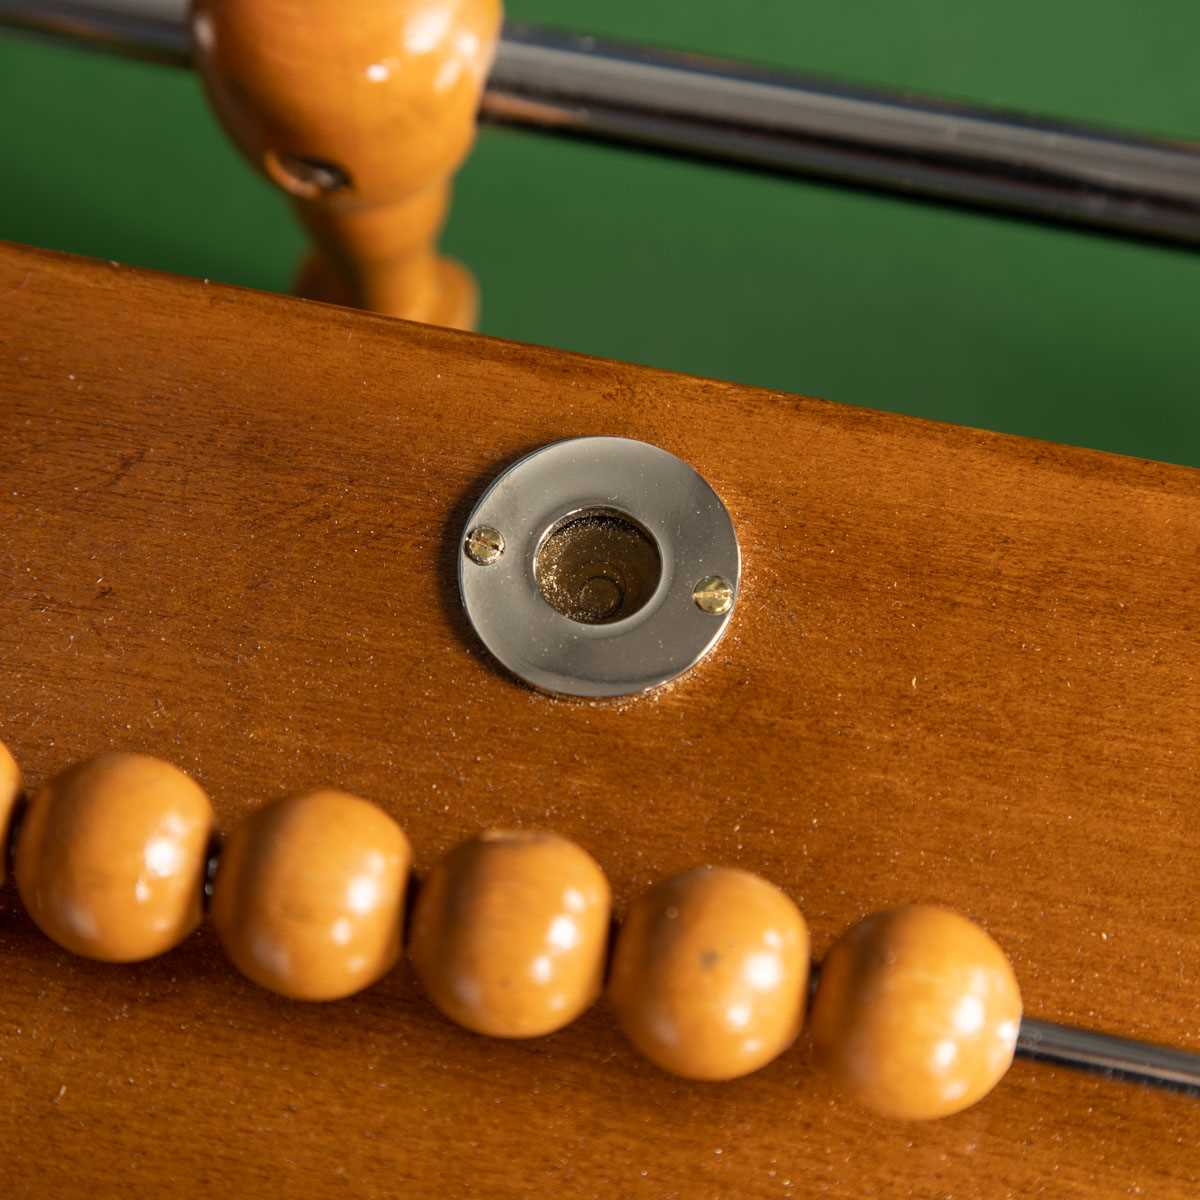 A MID 20TH CENTURY SWISS ART DECO STYLE FOOTBALL TABLE GAME - Image 8 of 37